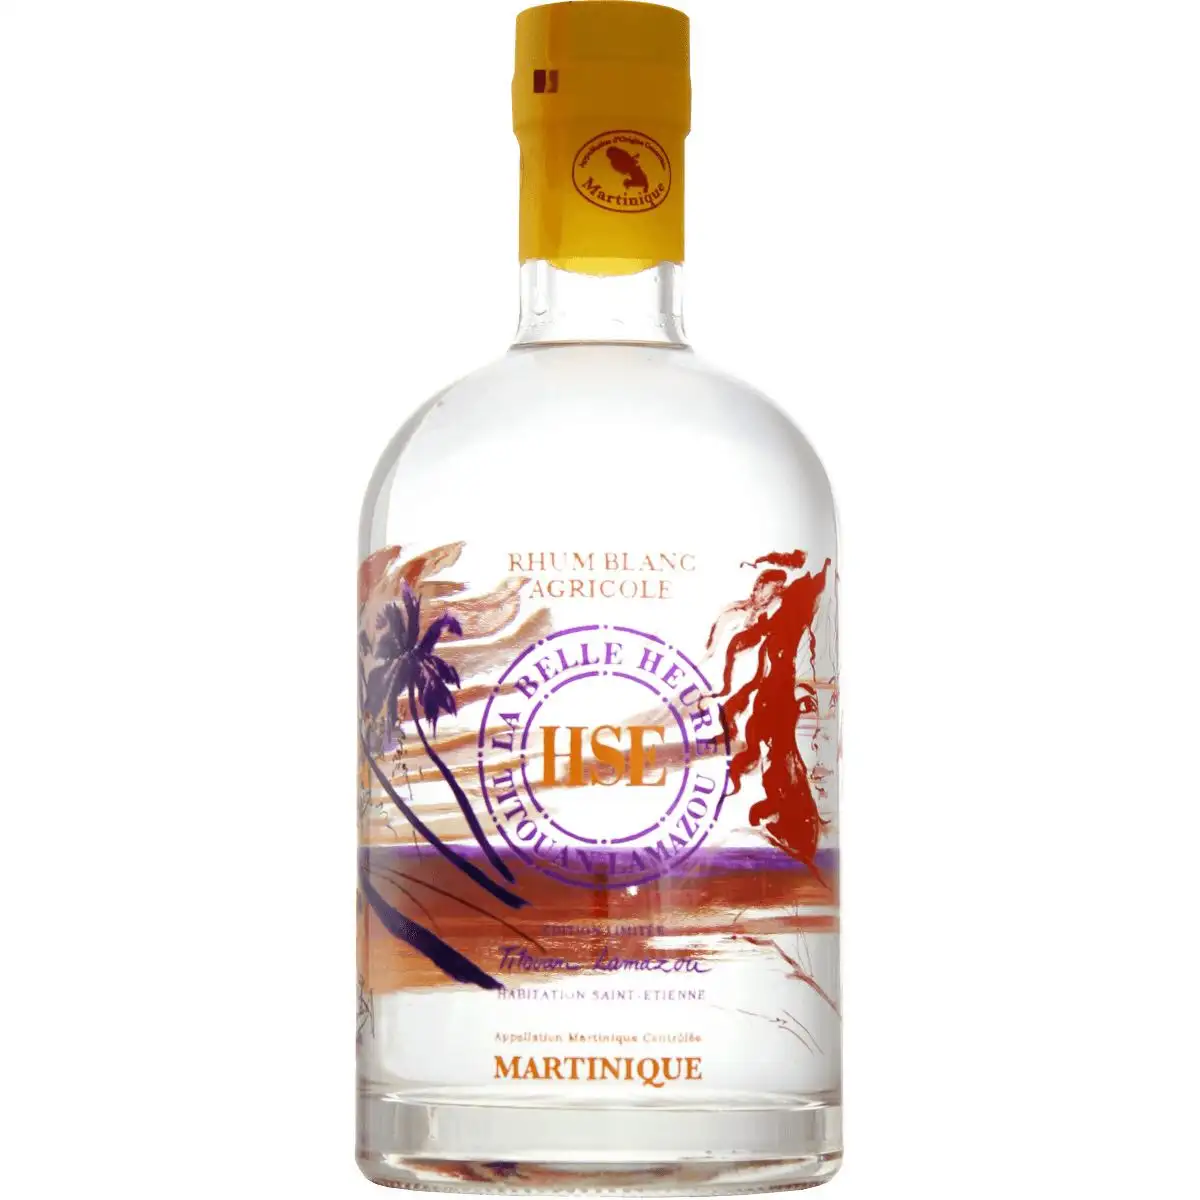 Image of the front of the bottle of the rum HSE Blanc Cuvée Titouan Lamazou